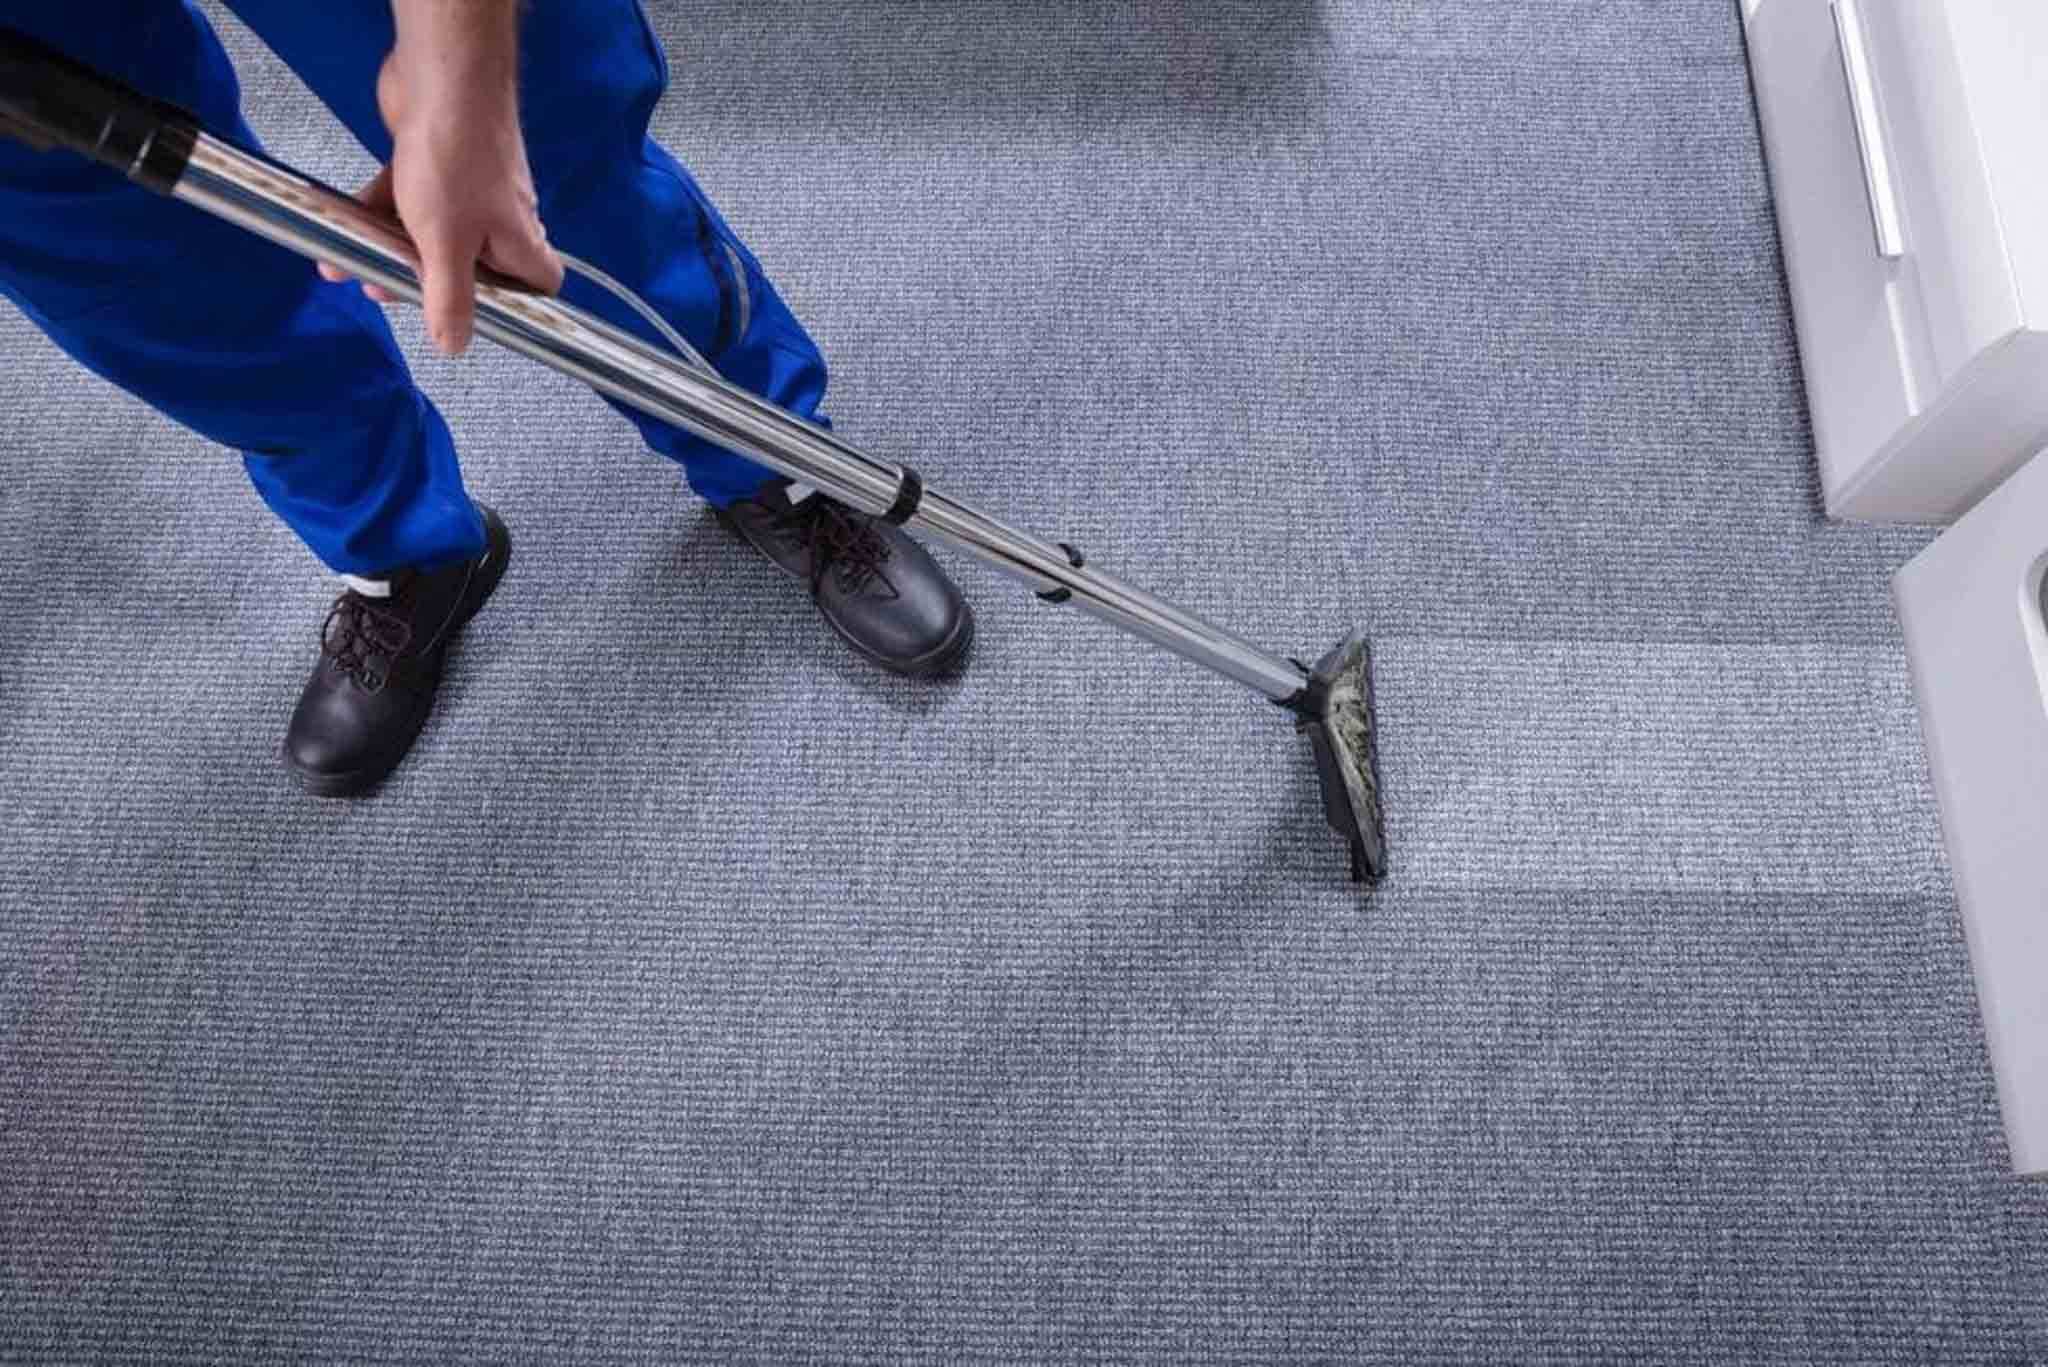 How To Get Musty Smell Out Of Carpet